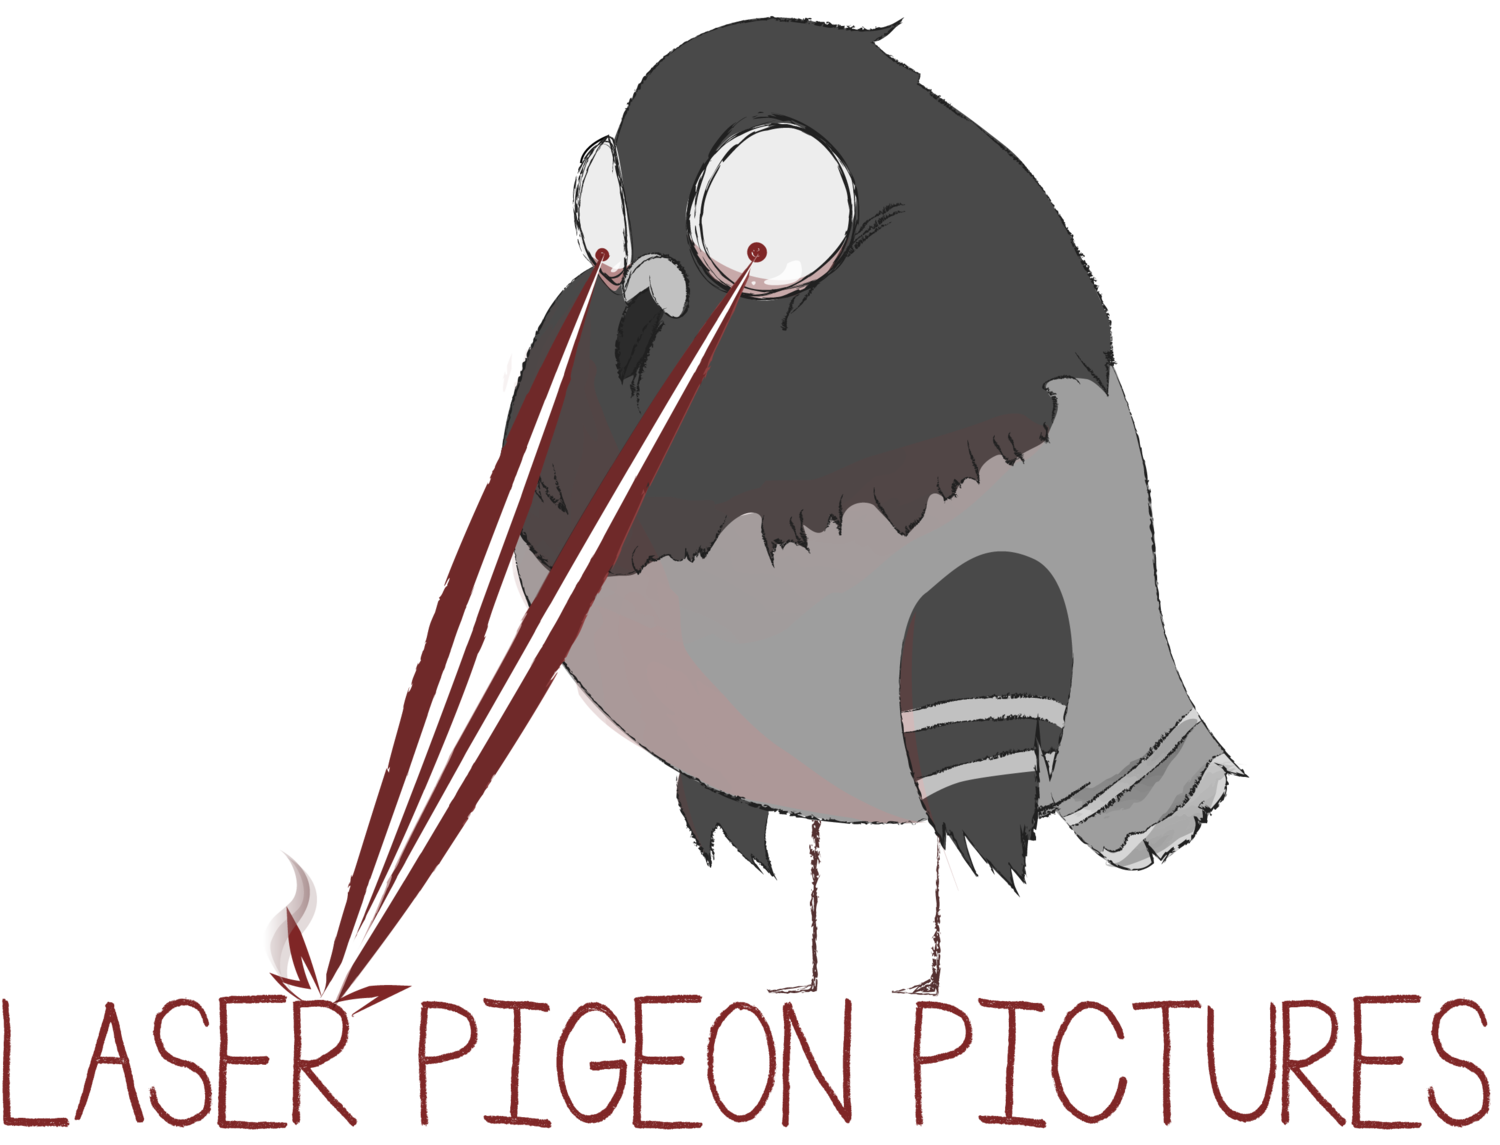 LASER PIGEON PICTURES